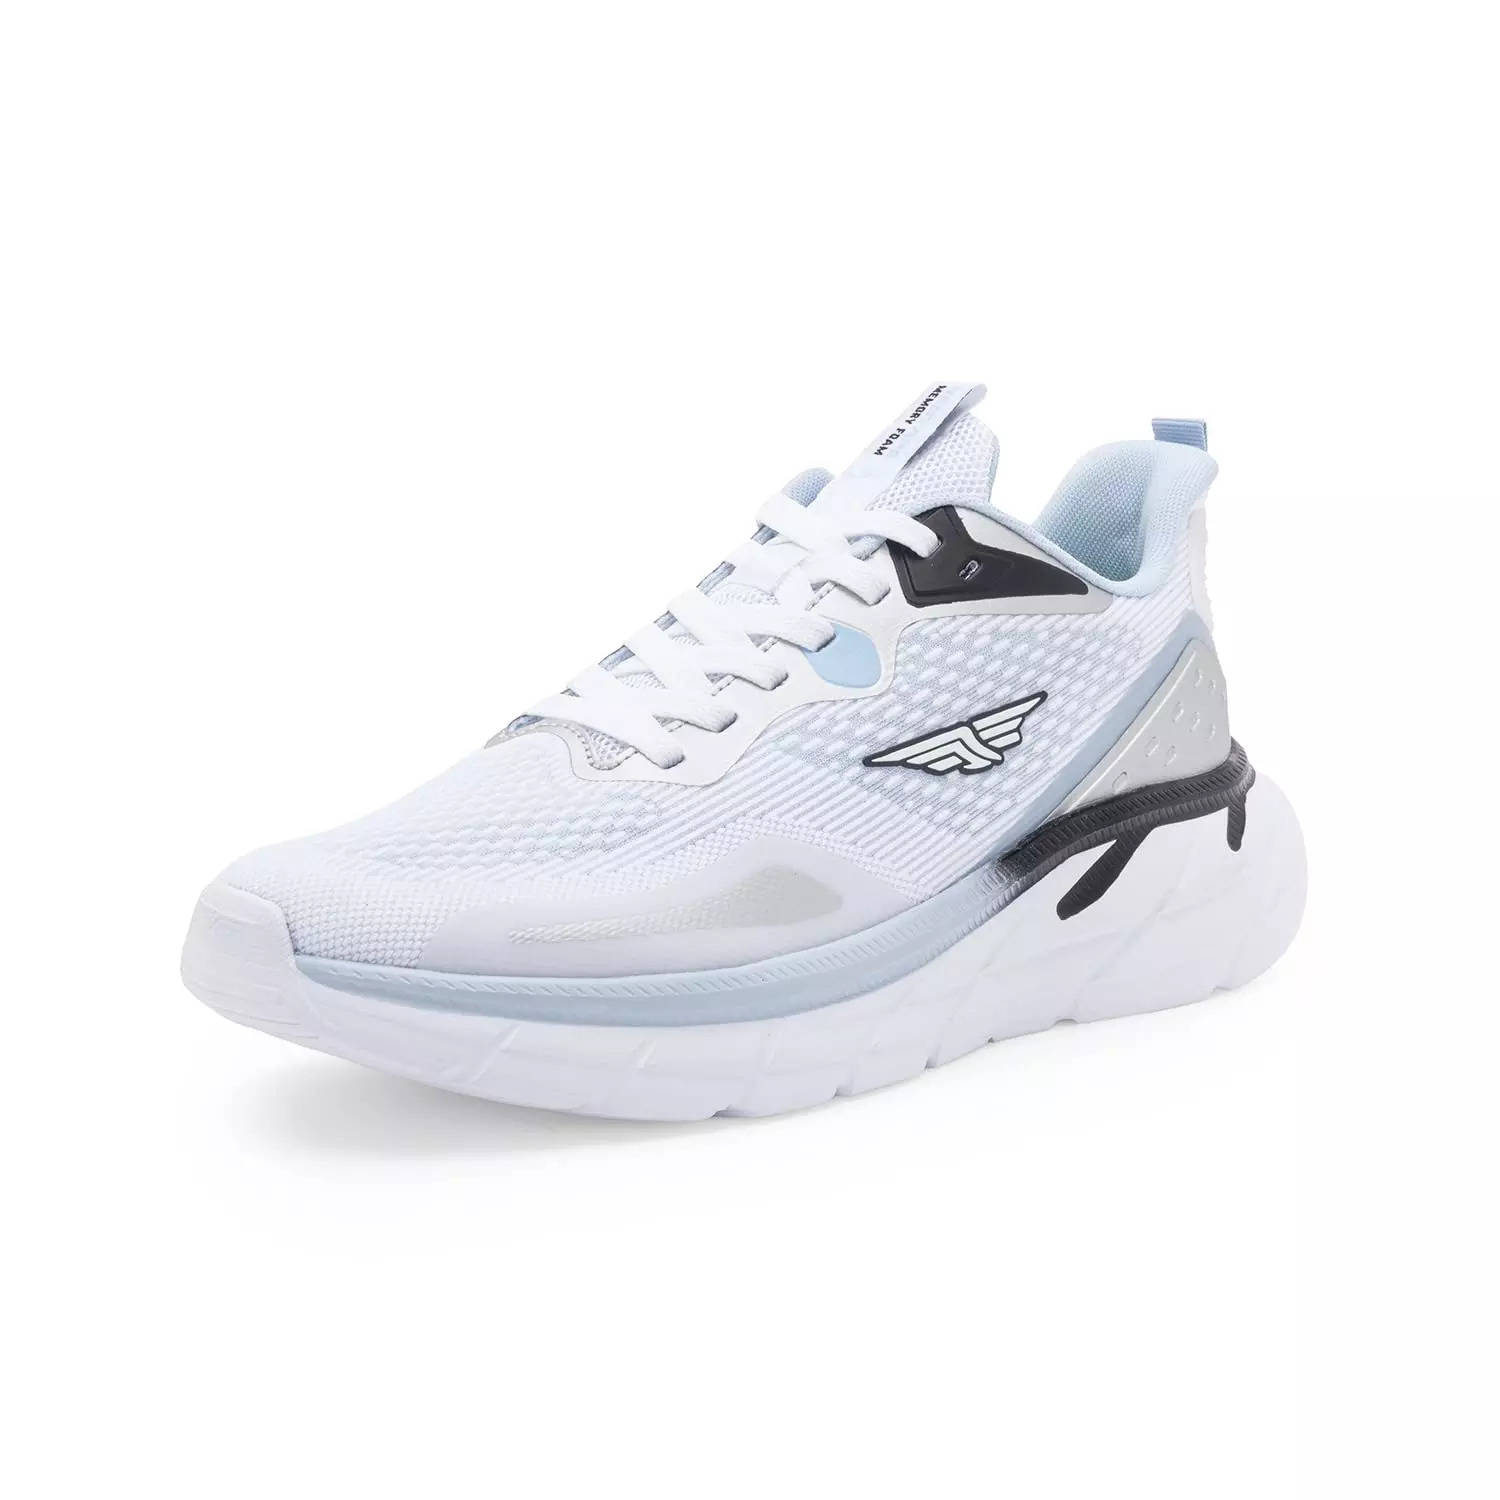 white Sports Shoes for Men: 8 Most Popular White Sports Shoes for Men ...